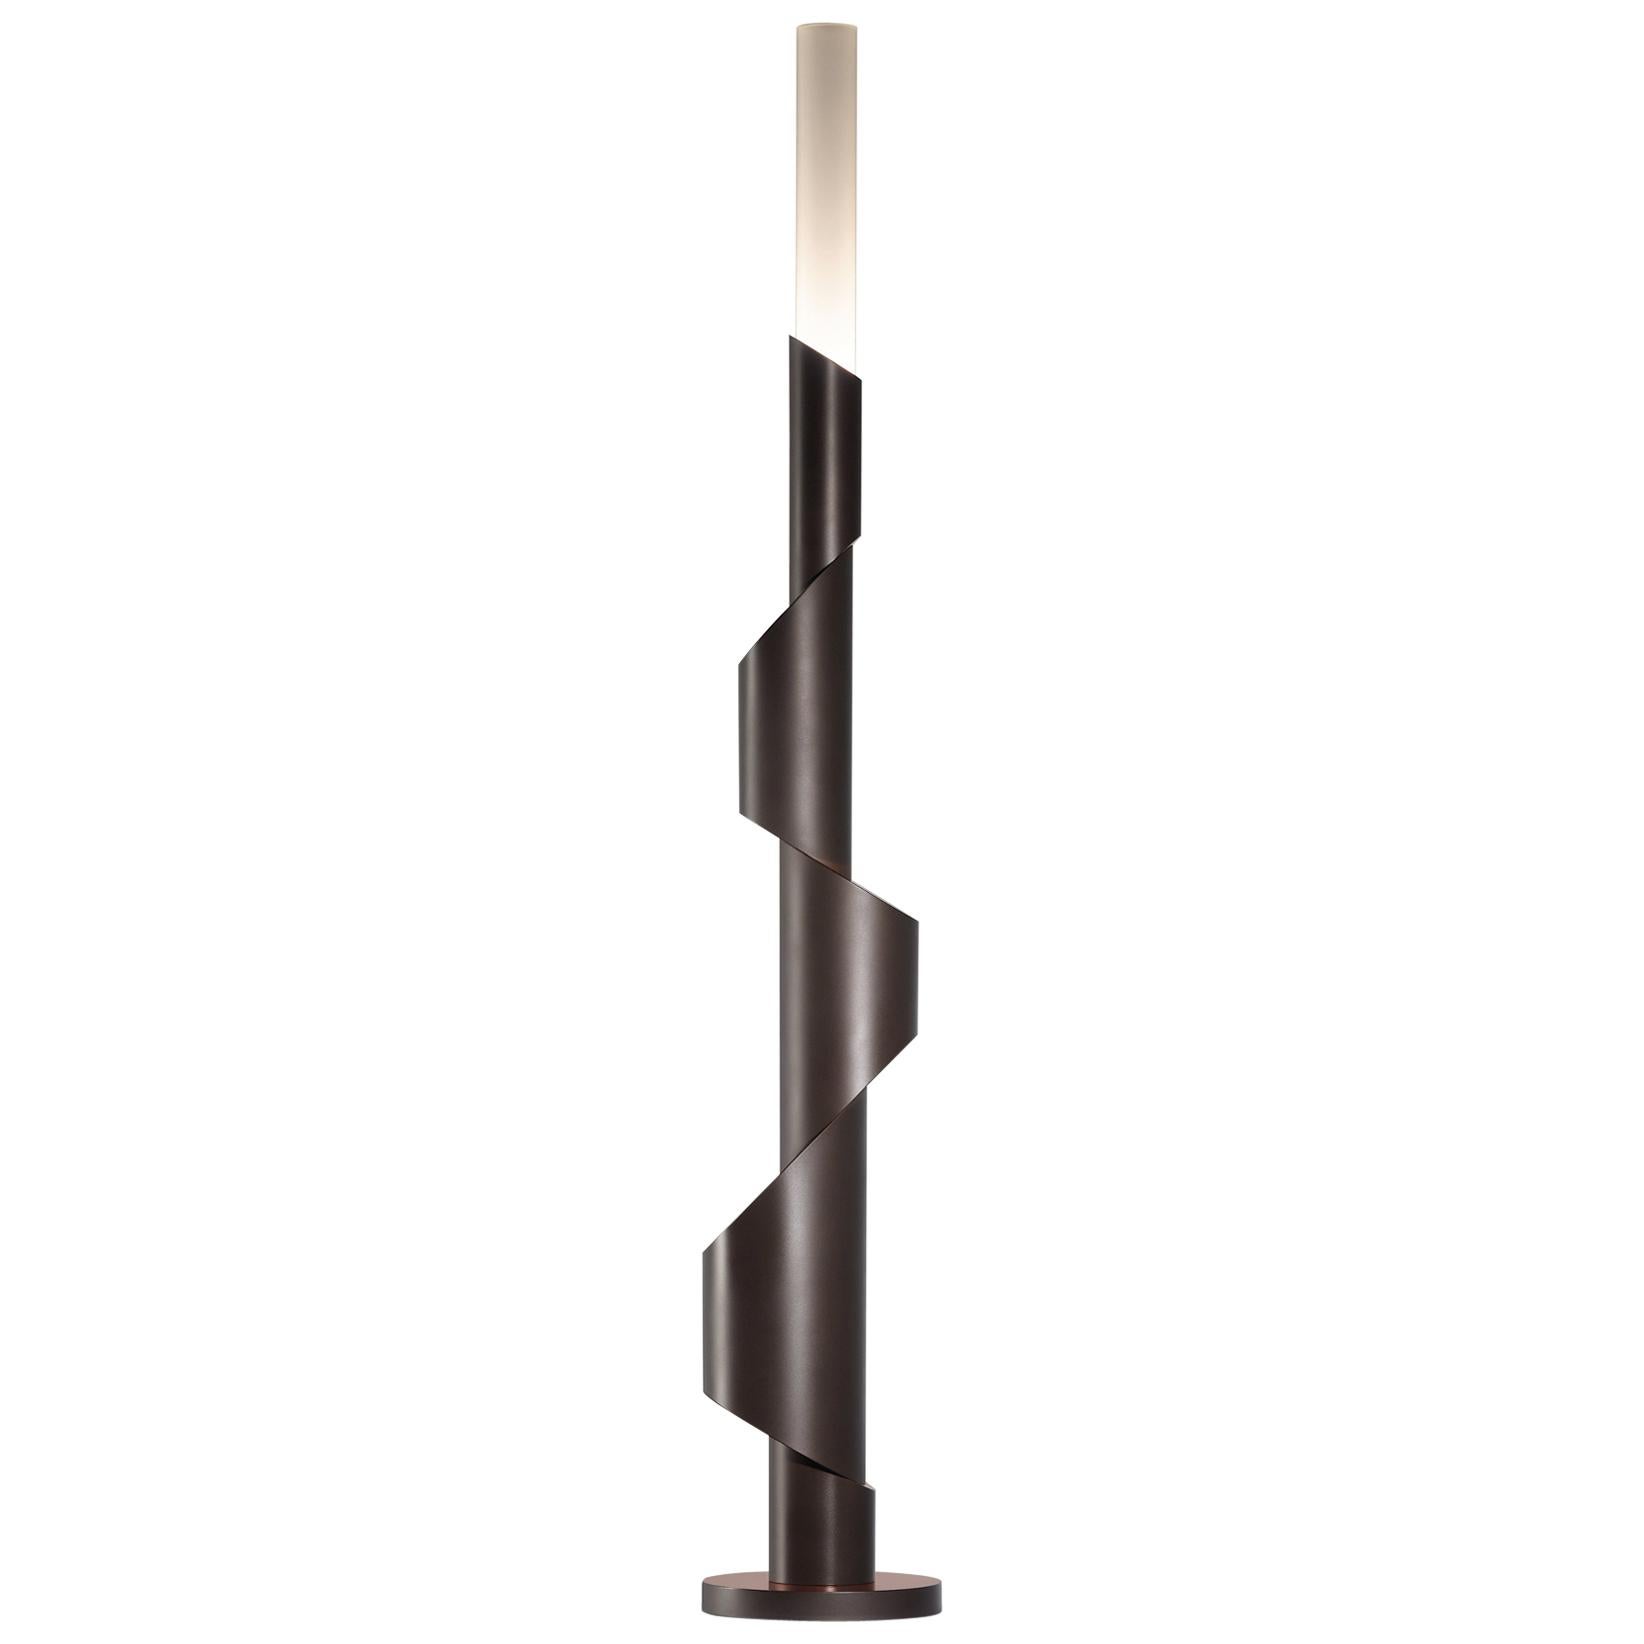 21st Century Design Totem I Floor lamp with Smoked Nickel and Copper Finish